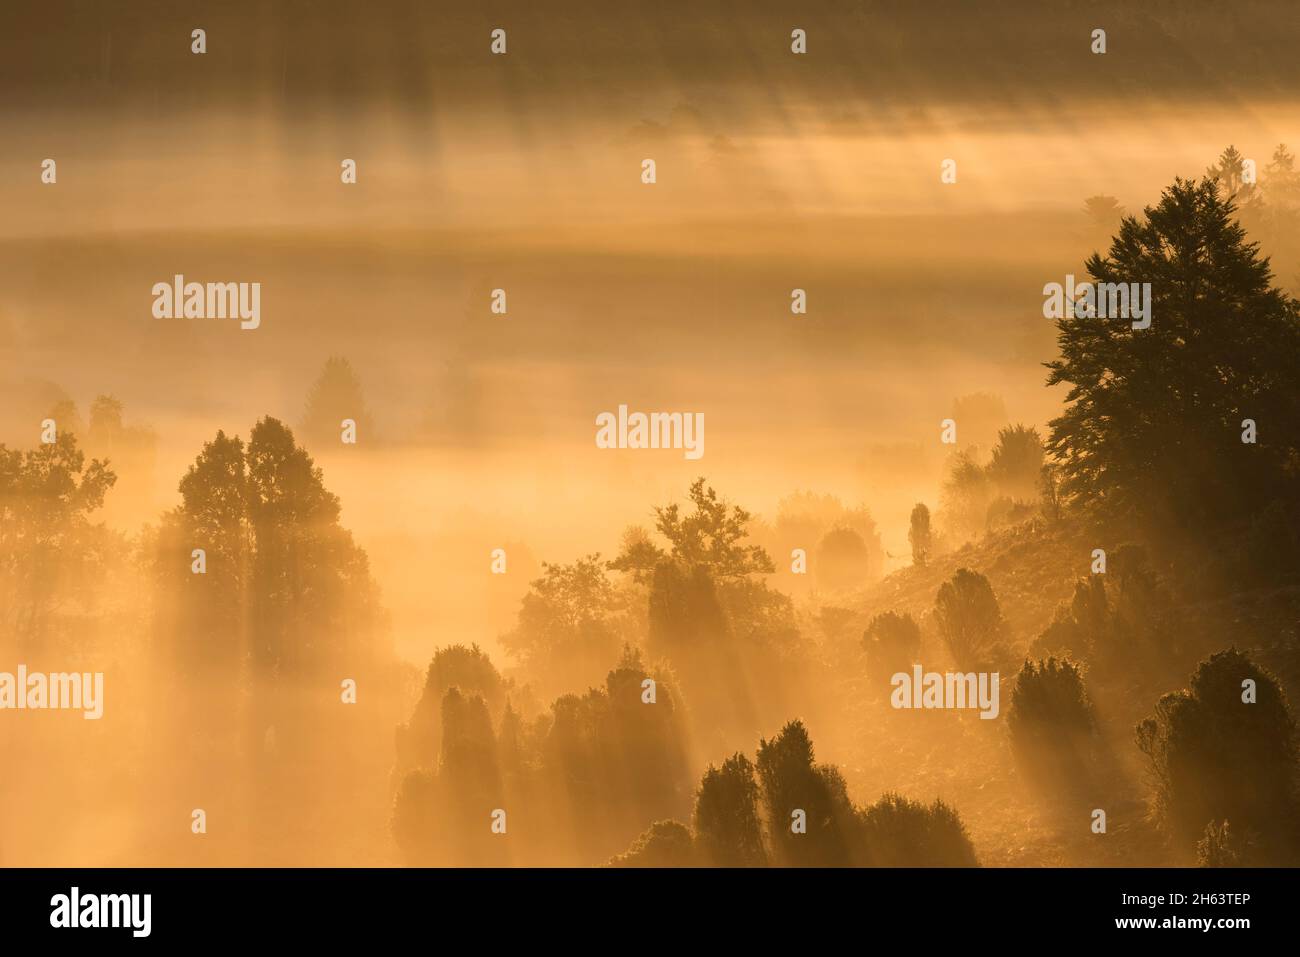 morning mood in the totengrund,the light of the rising sun makes the fog shine golden,trees and juniper bushes cast shadows,nature reserve near wilsede near bispingen,lüneburg heath nature park,germany,lower saxony Stock Photo